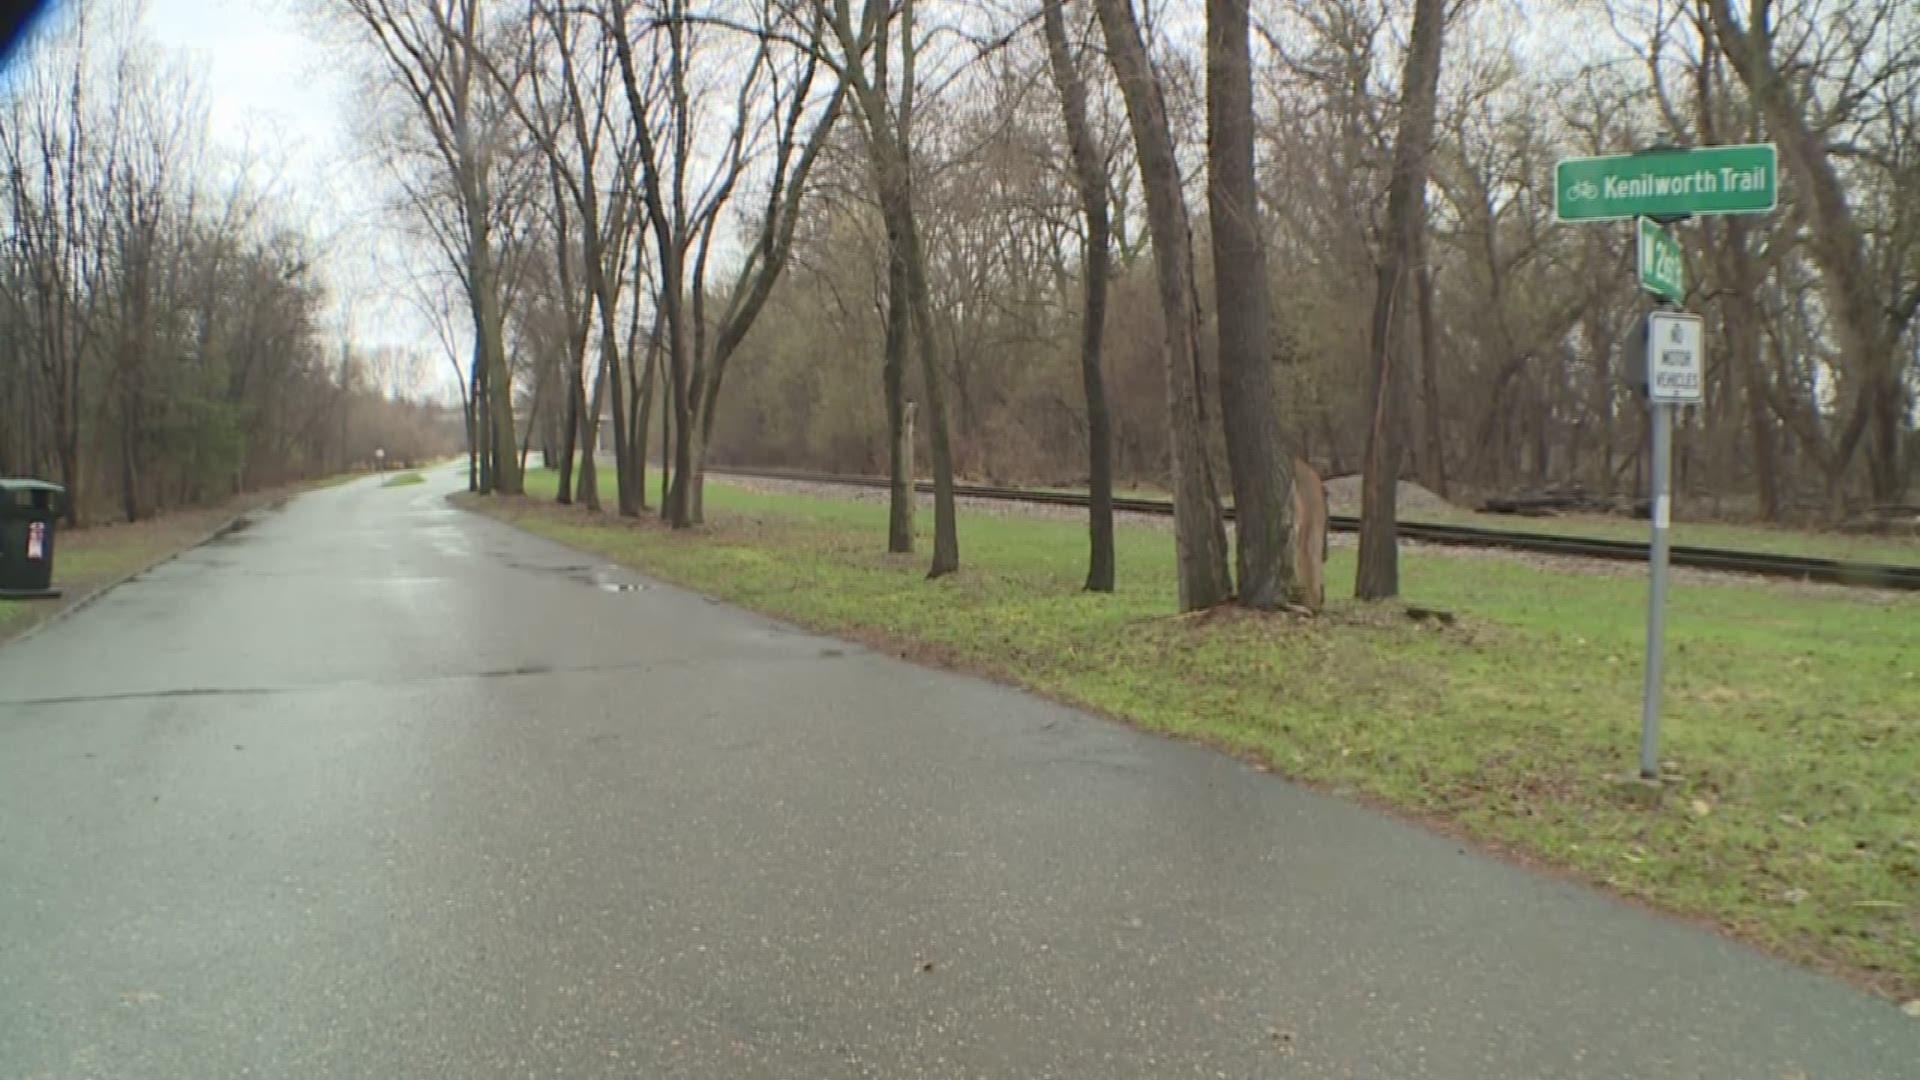 The Kenilworth Trail in Minneapolis will be closed as early as May 13, for construction of the Southwest Light Rail. That will involve cutting down more than 1,000 trees in that corridor, between Lake of the Isles and Cedar Lake. As John Croman reports, neighbors and some lawmakers are asking for a delay in taking those trees down.